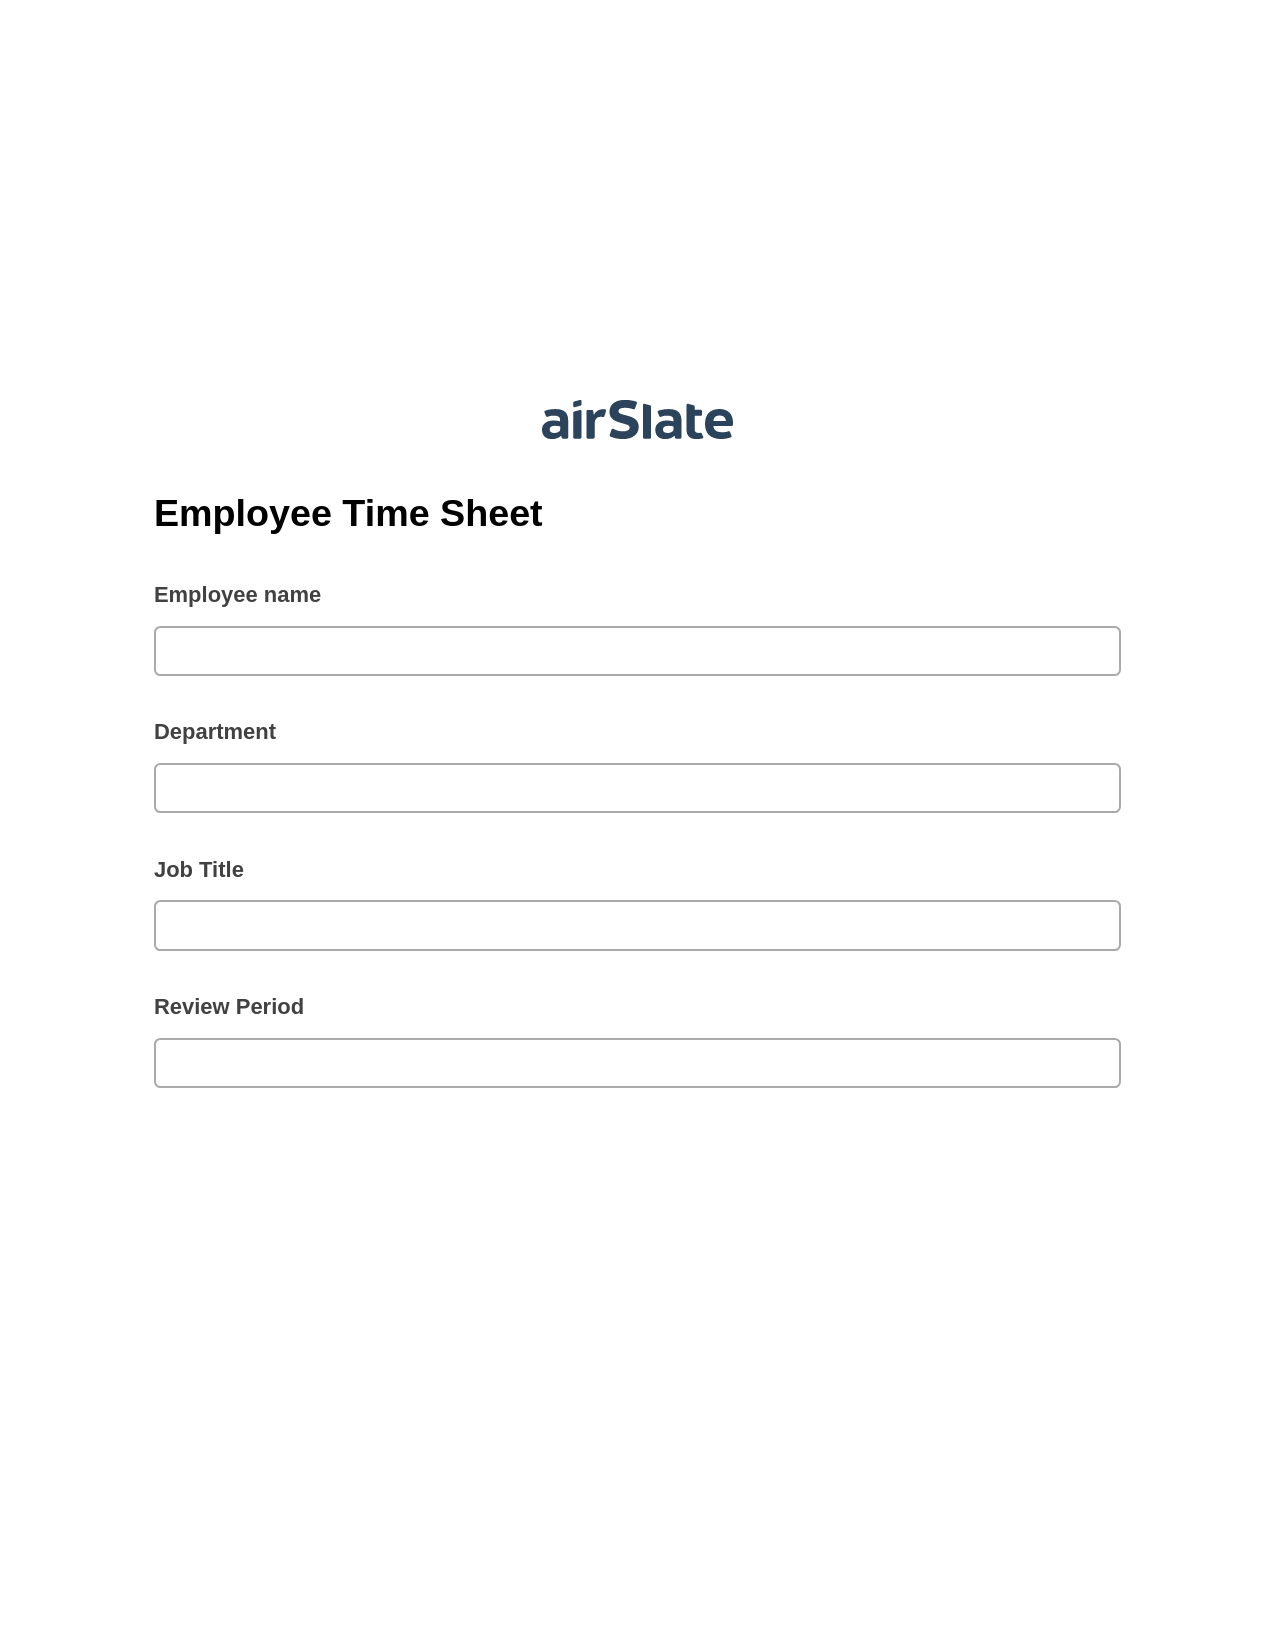 Employee Time Sheet Pre-fill Dropdowns from Google Sheet Bot, Update Audit Trail Bot, Archive to Box Bot